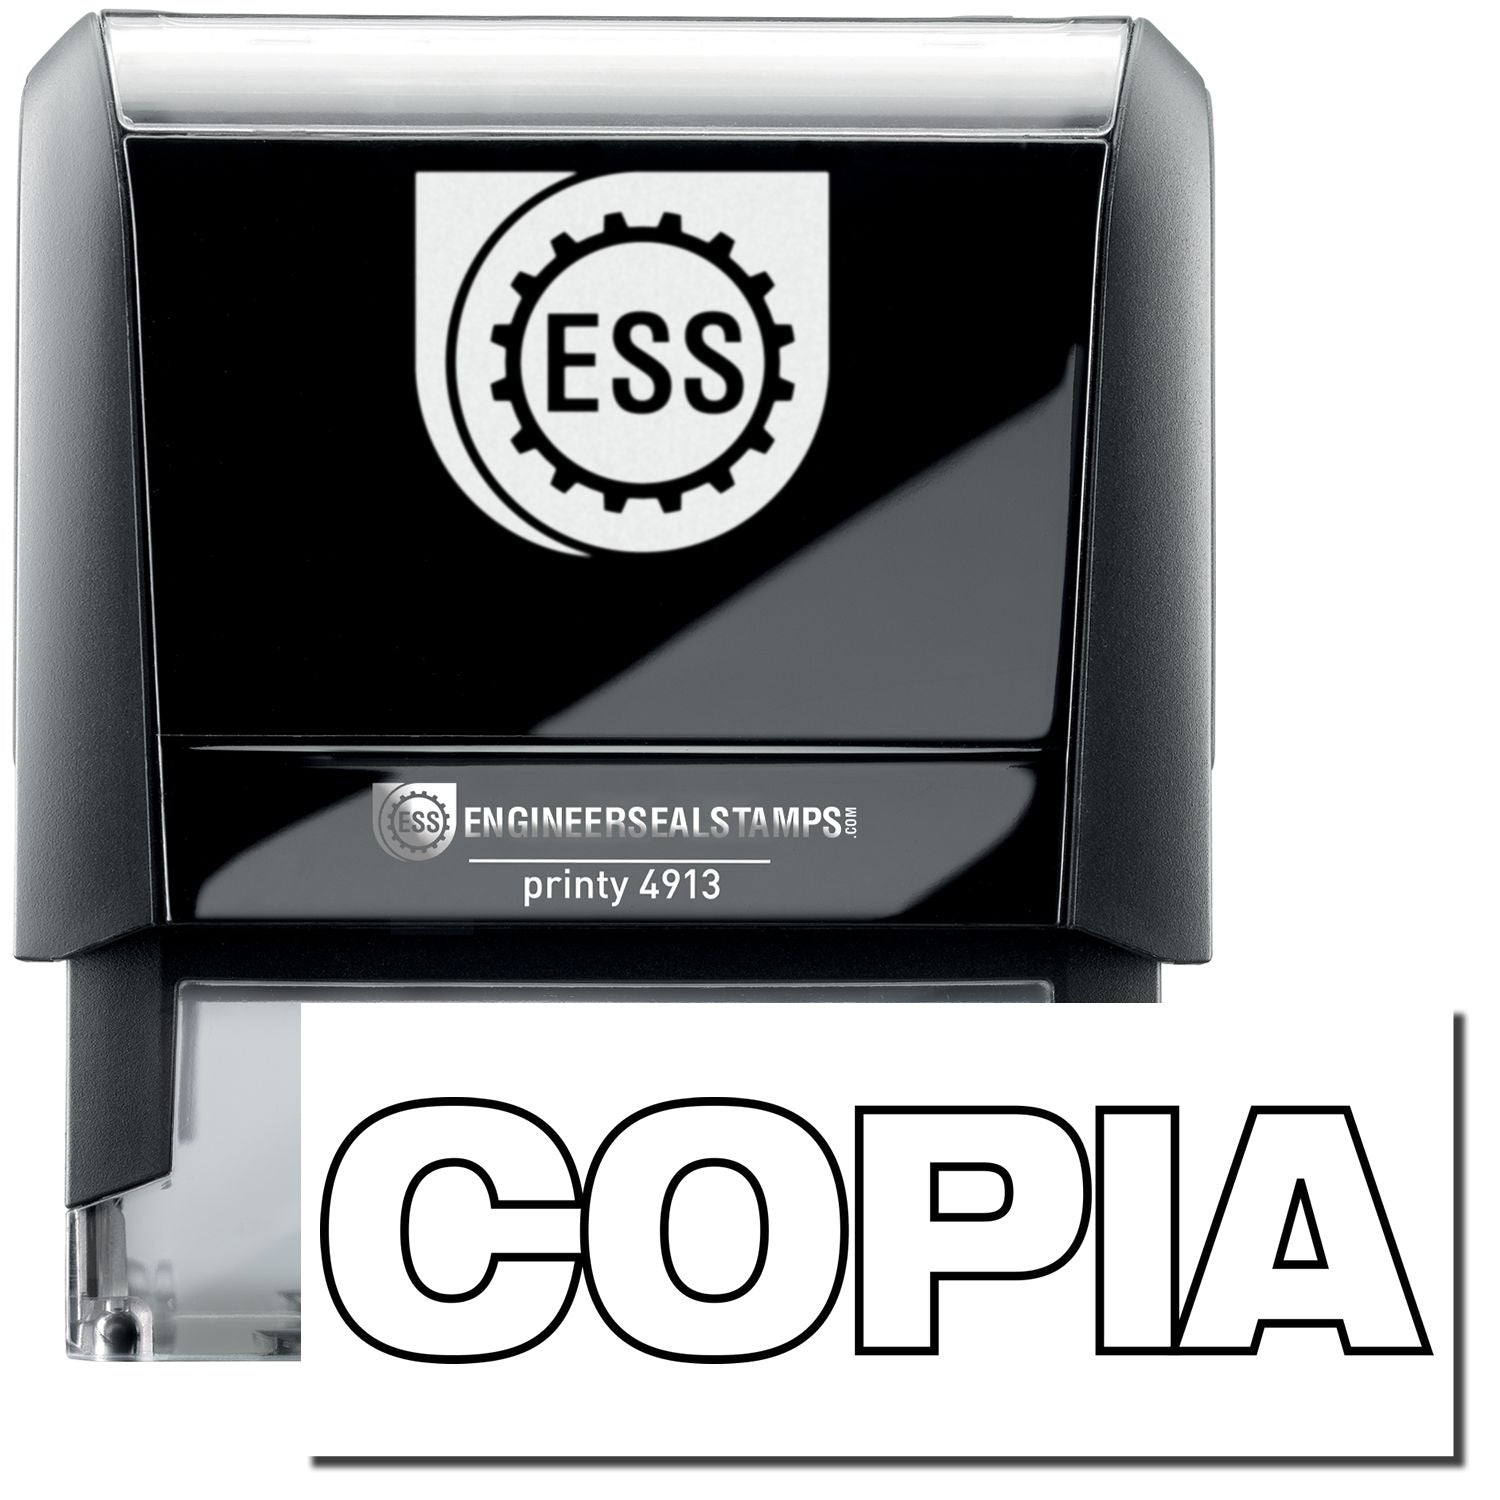 A self-inking stamp with a stamped image showing how the text "COPIA" in a large outline style is displayed by it after stamping.